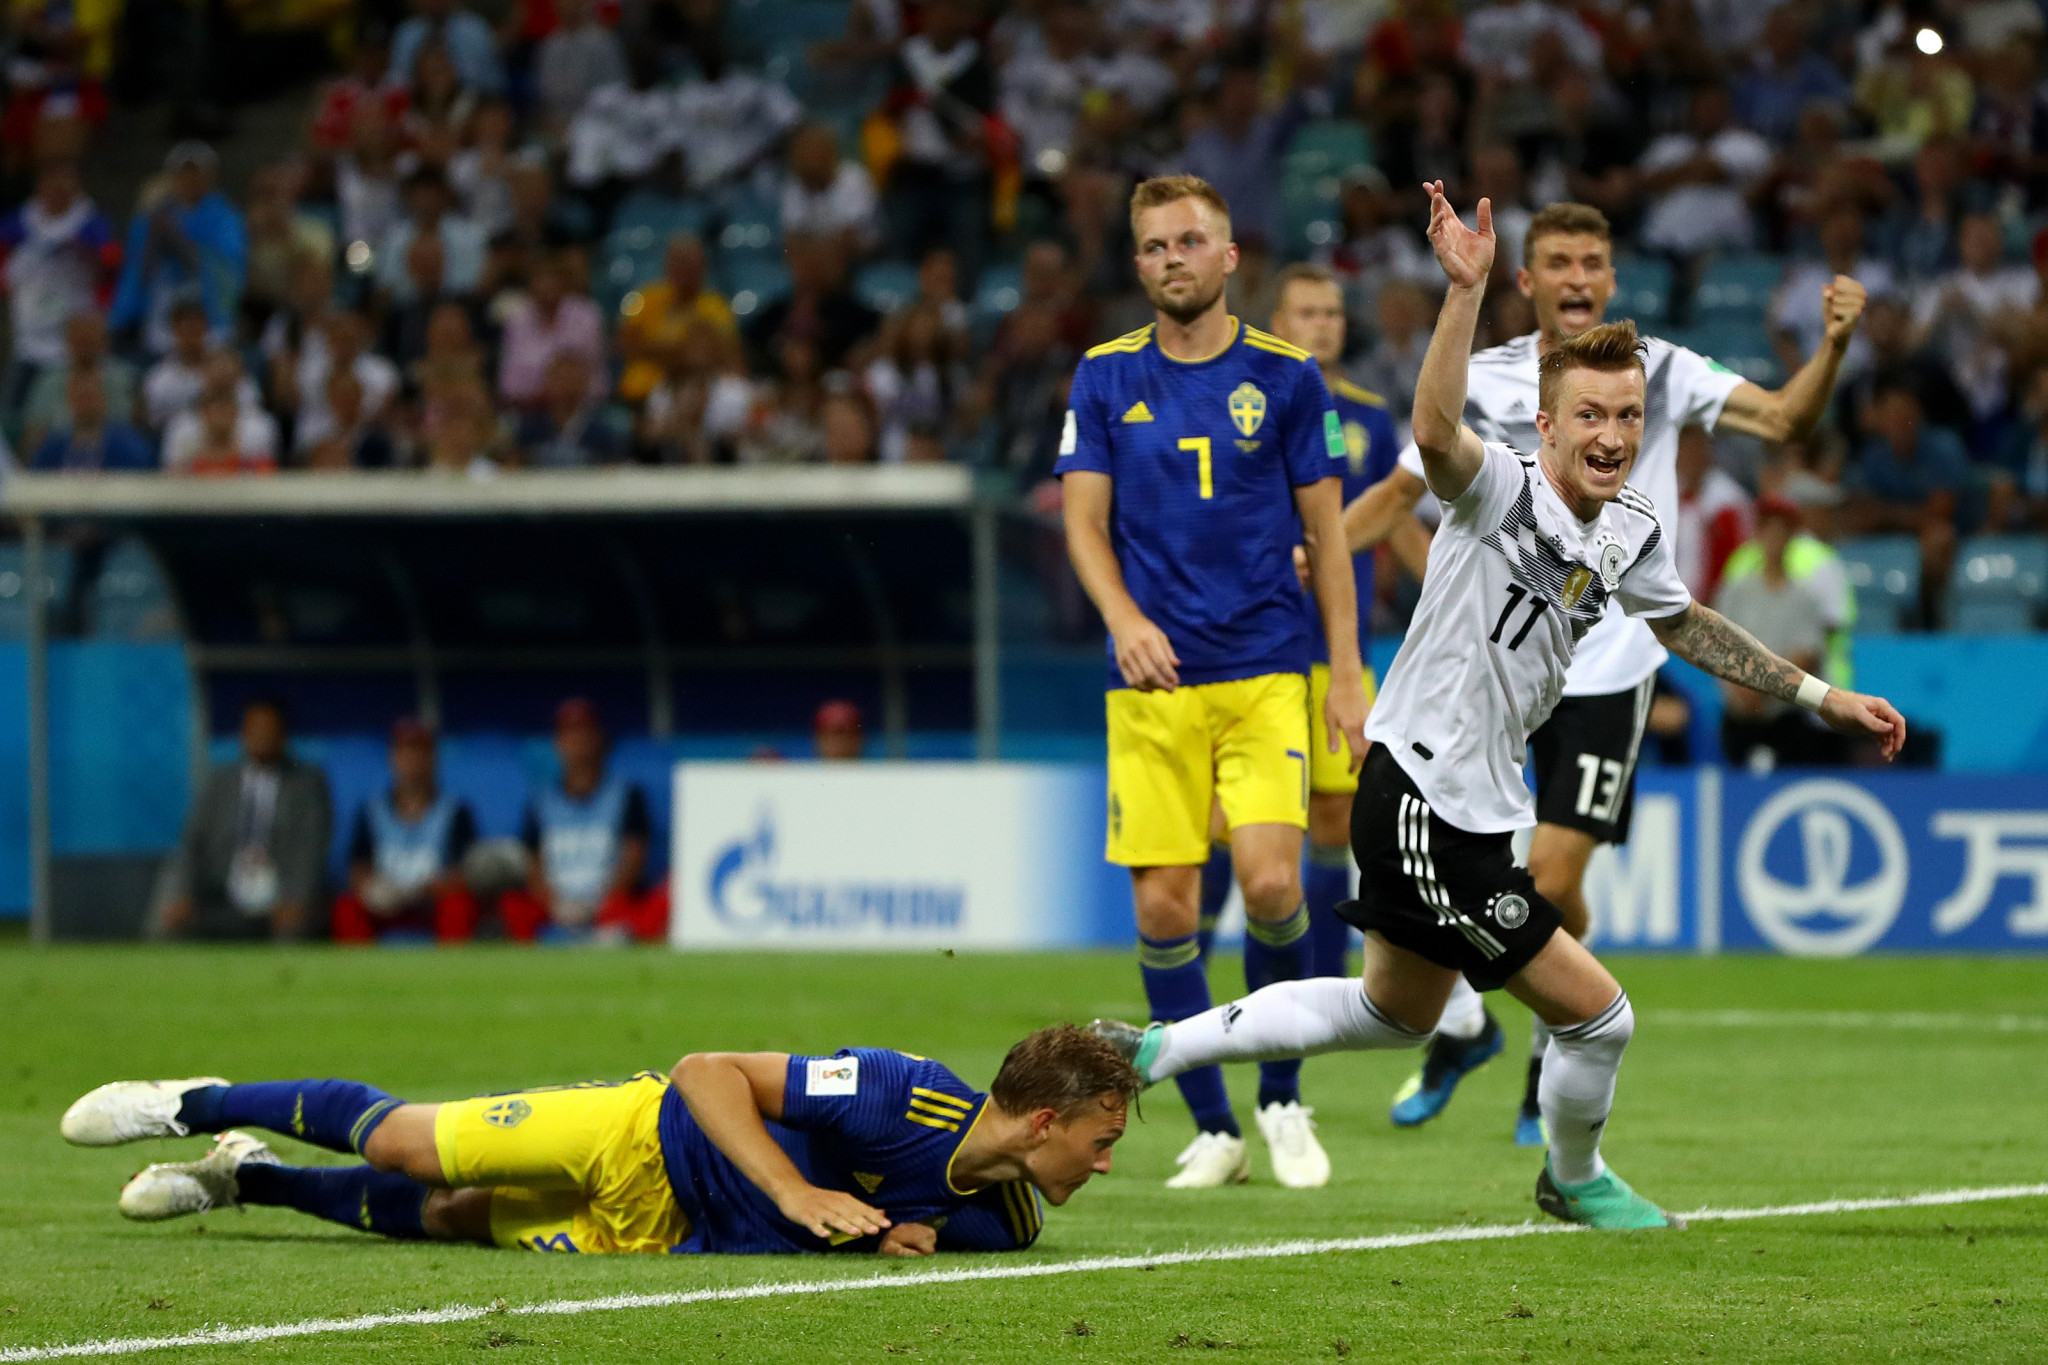 Marco Reus equalised as Germany looked to avoid becoming the fourth straight defending champions to suffer group stage elimination ©Getty Images